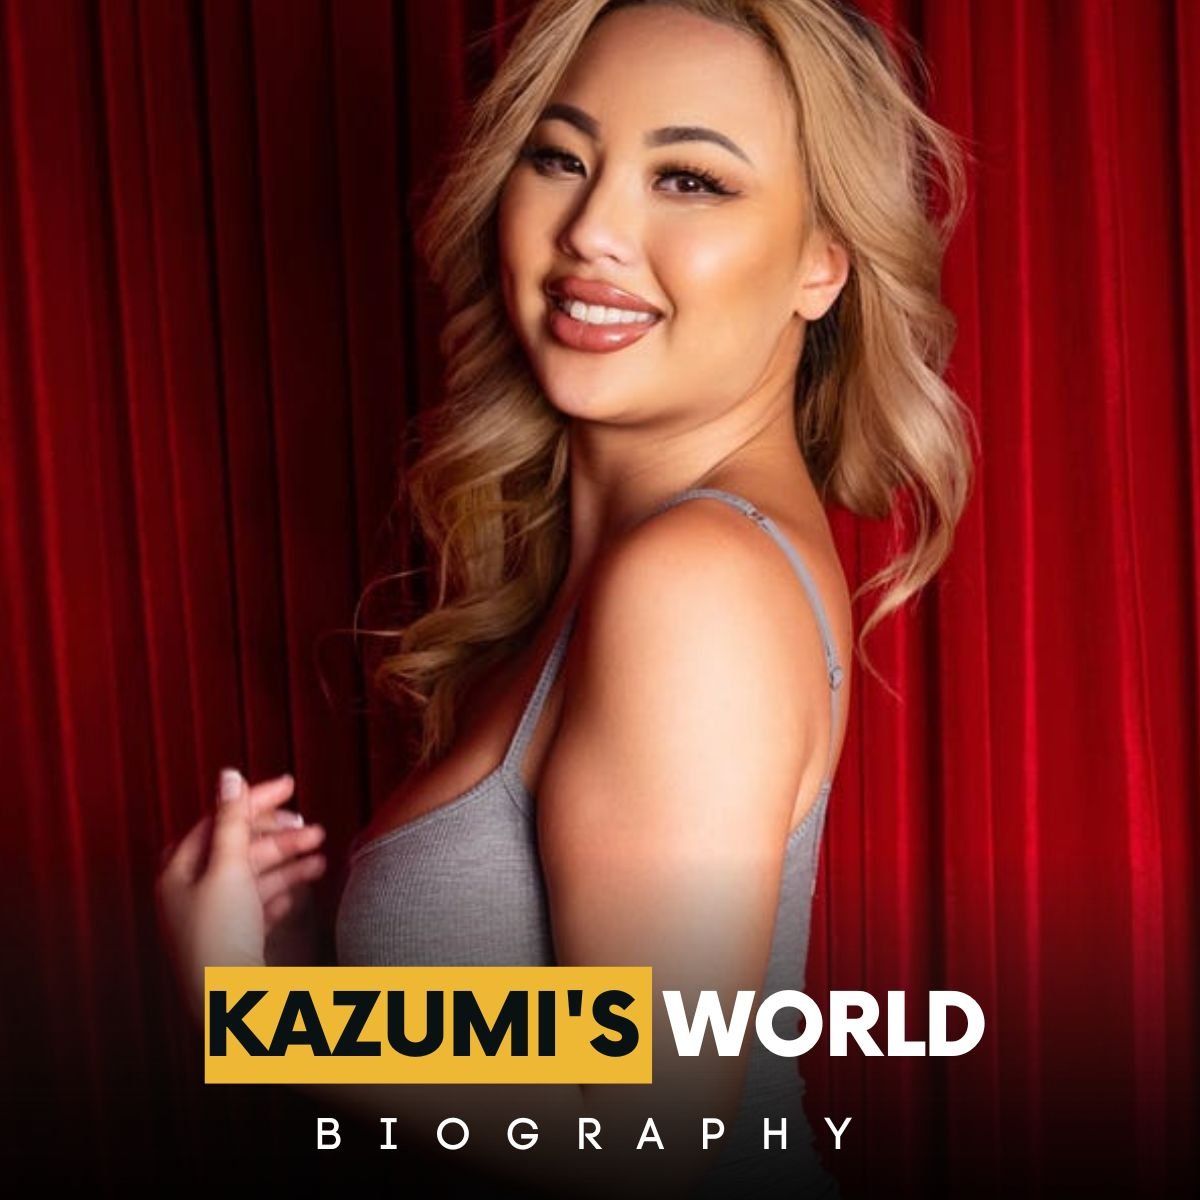 Who Is Kazumi? Here’s Everything You Need To Know!